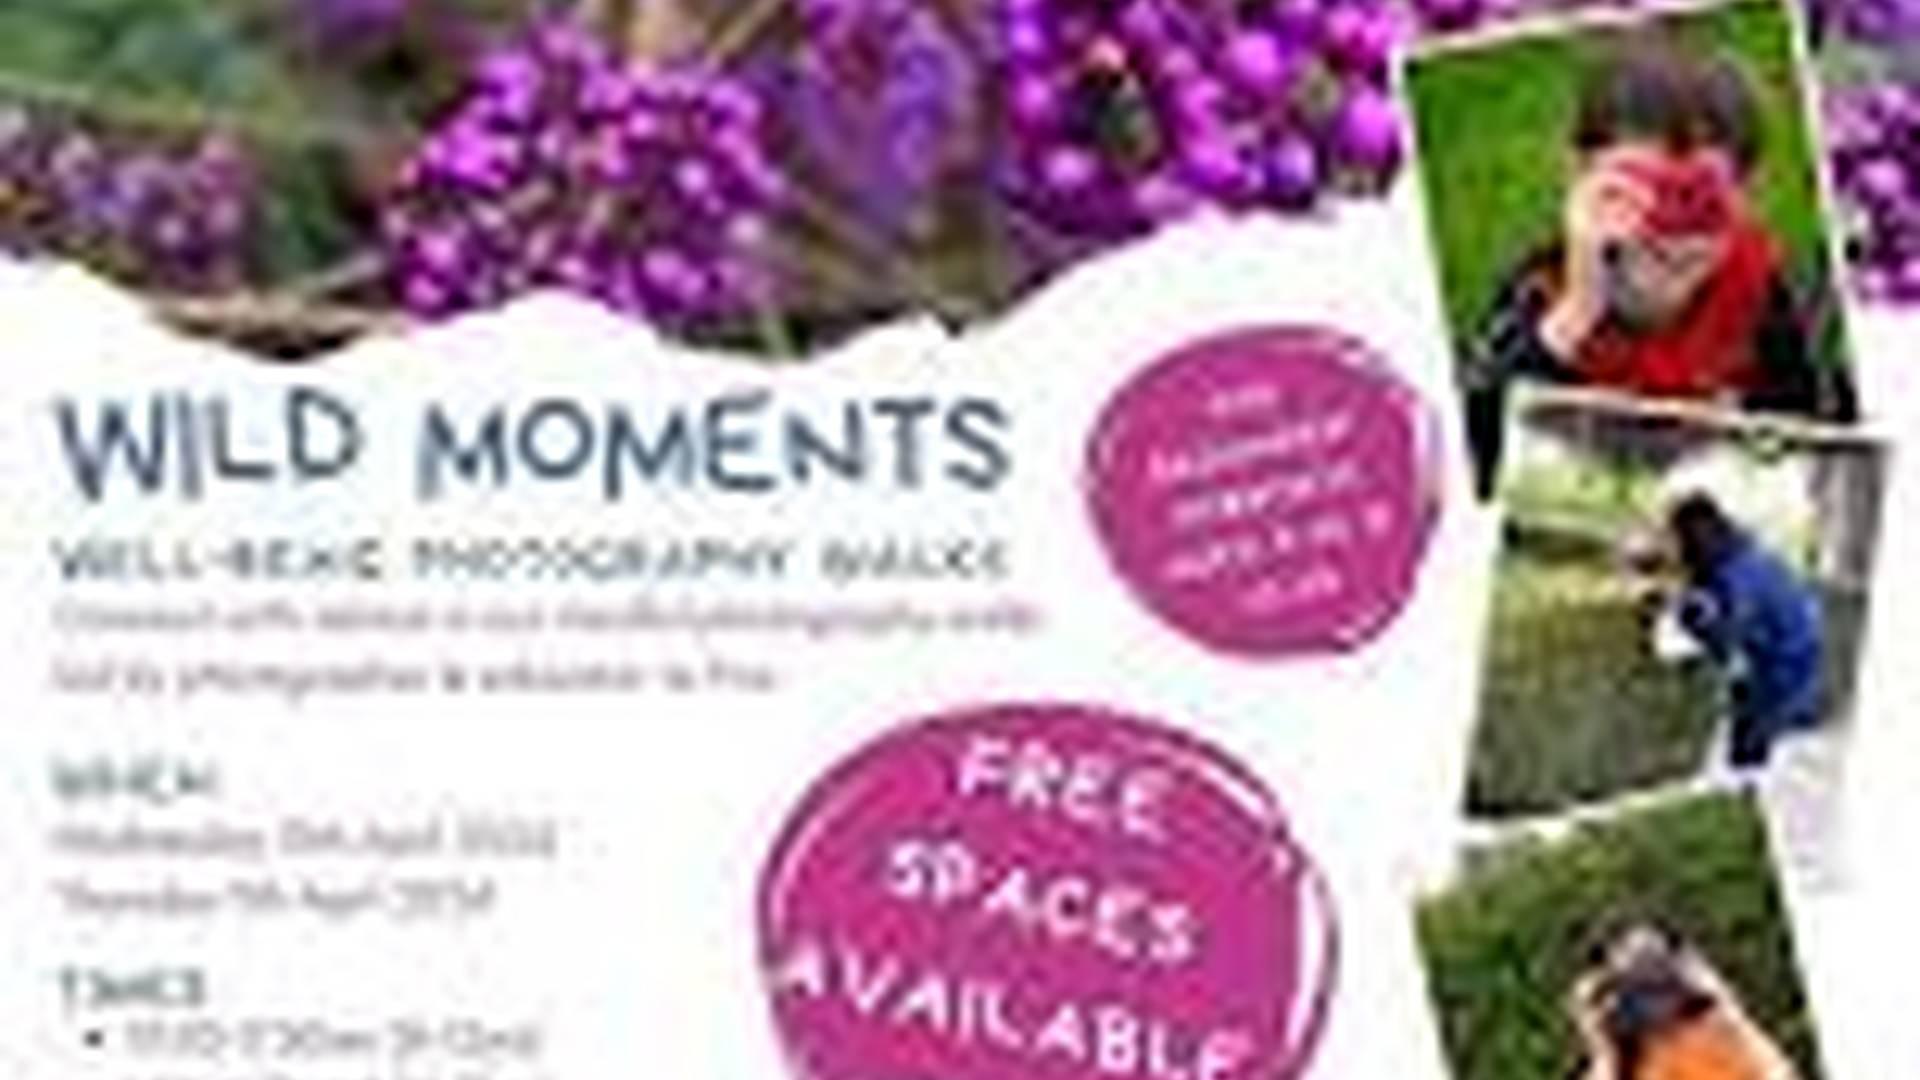 Wild Moments - Nature Photography for 8 - 12s (FREE) photo